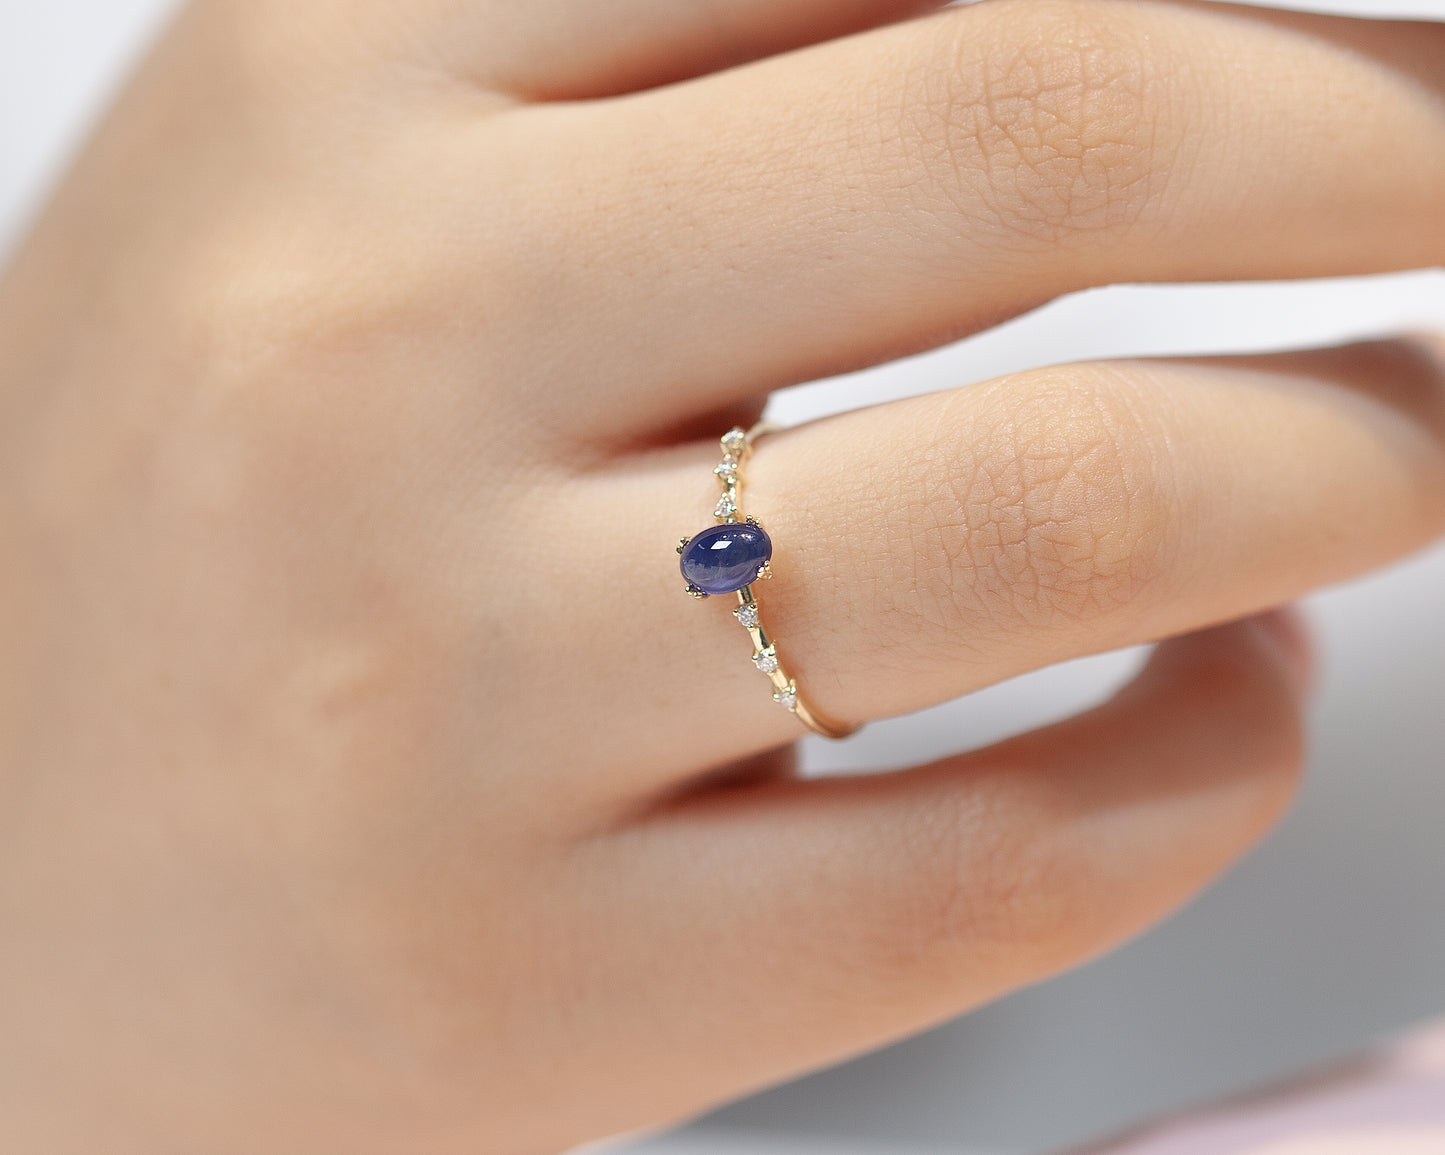 Dainty Ring, Oval Cabochon Smooth Polished Sapphire with Sprinkled Diamonds, 14K Gold